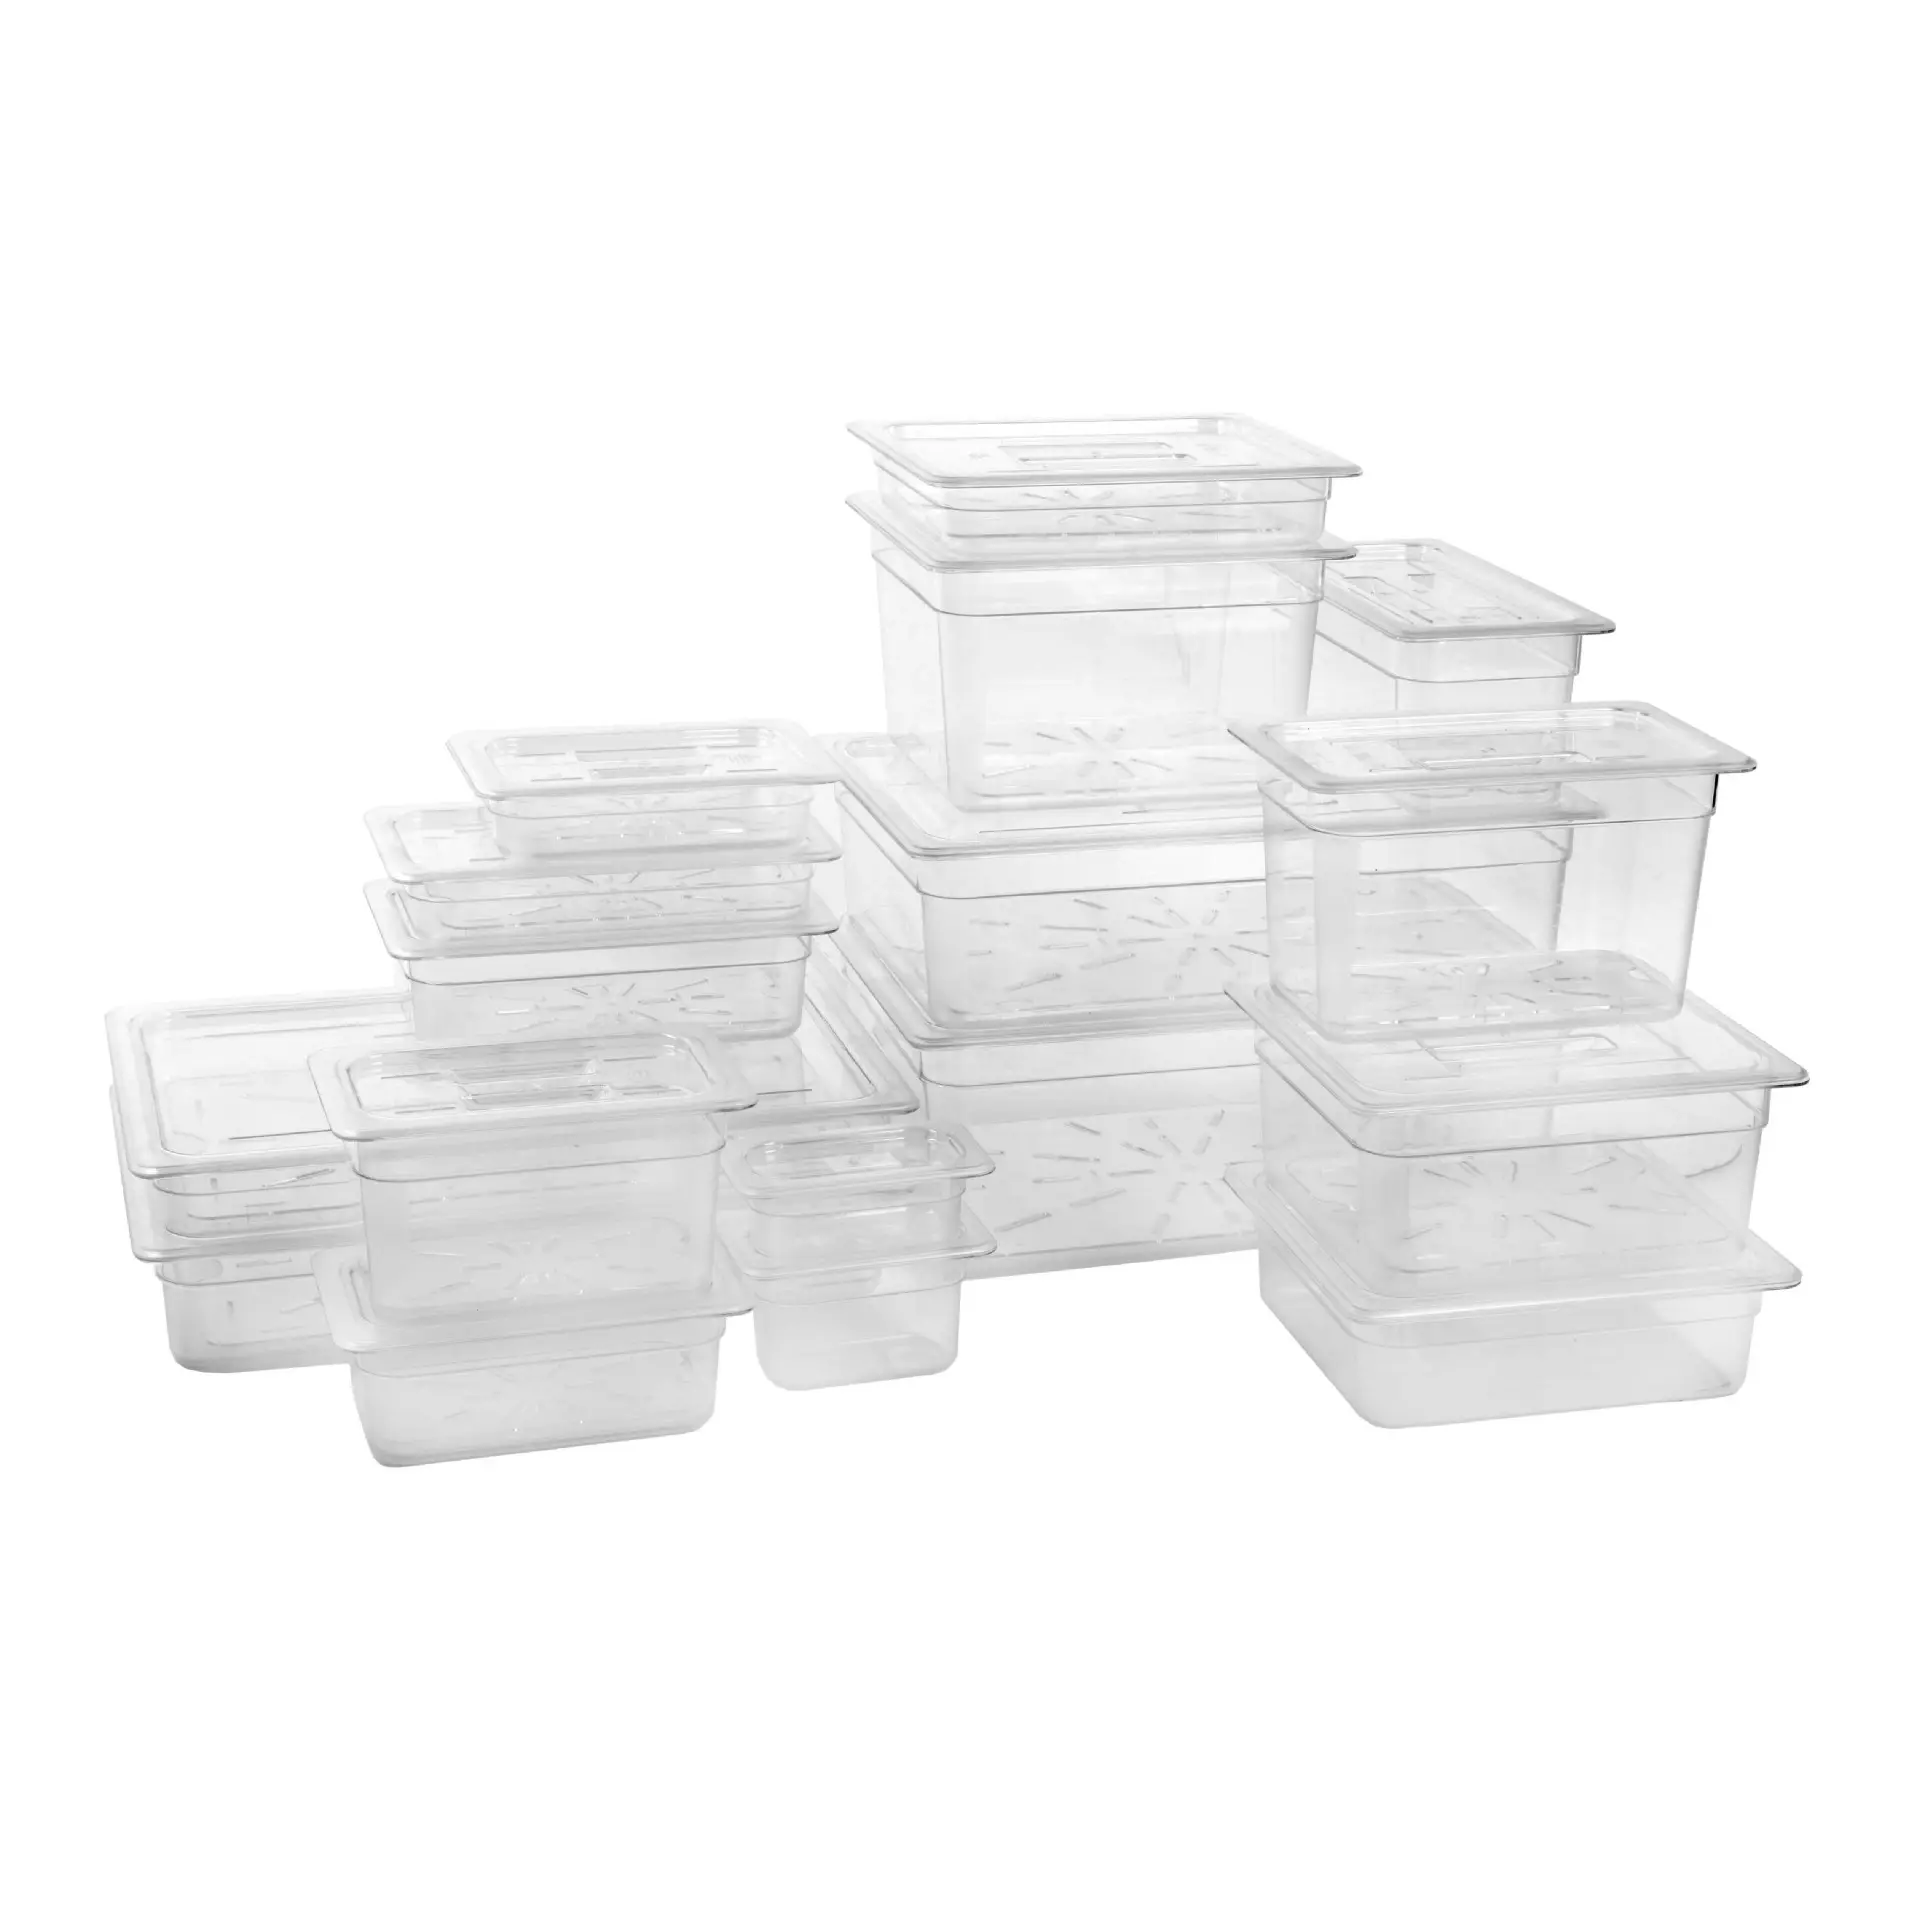 1/3 Size High Quality Food grade plastic food pans buffet gastronorm containers